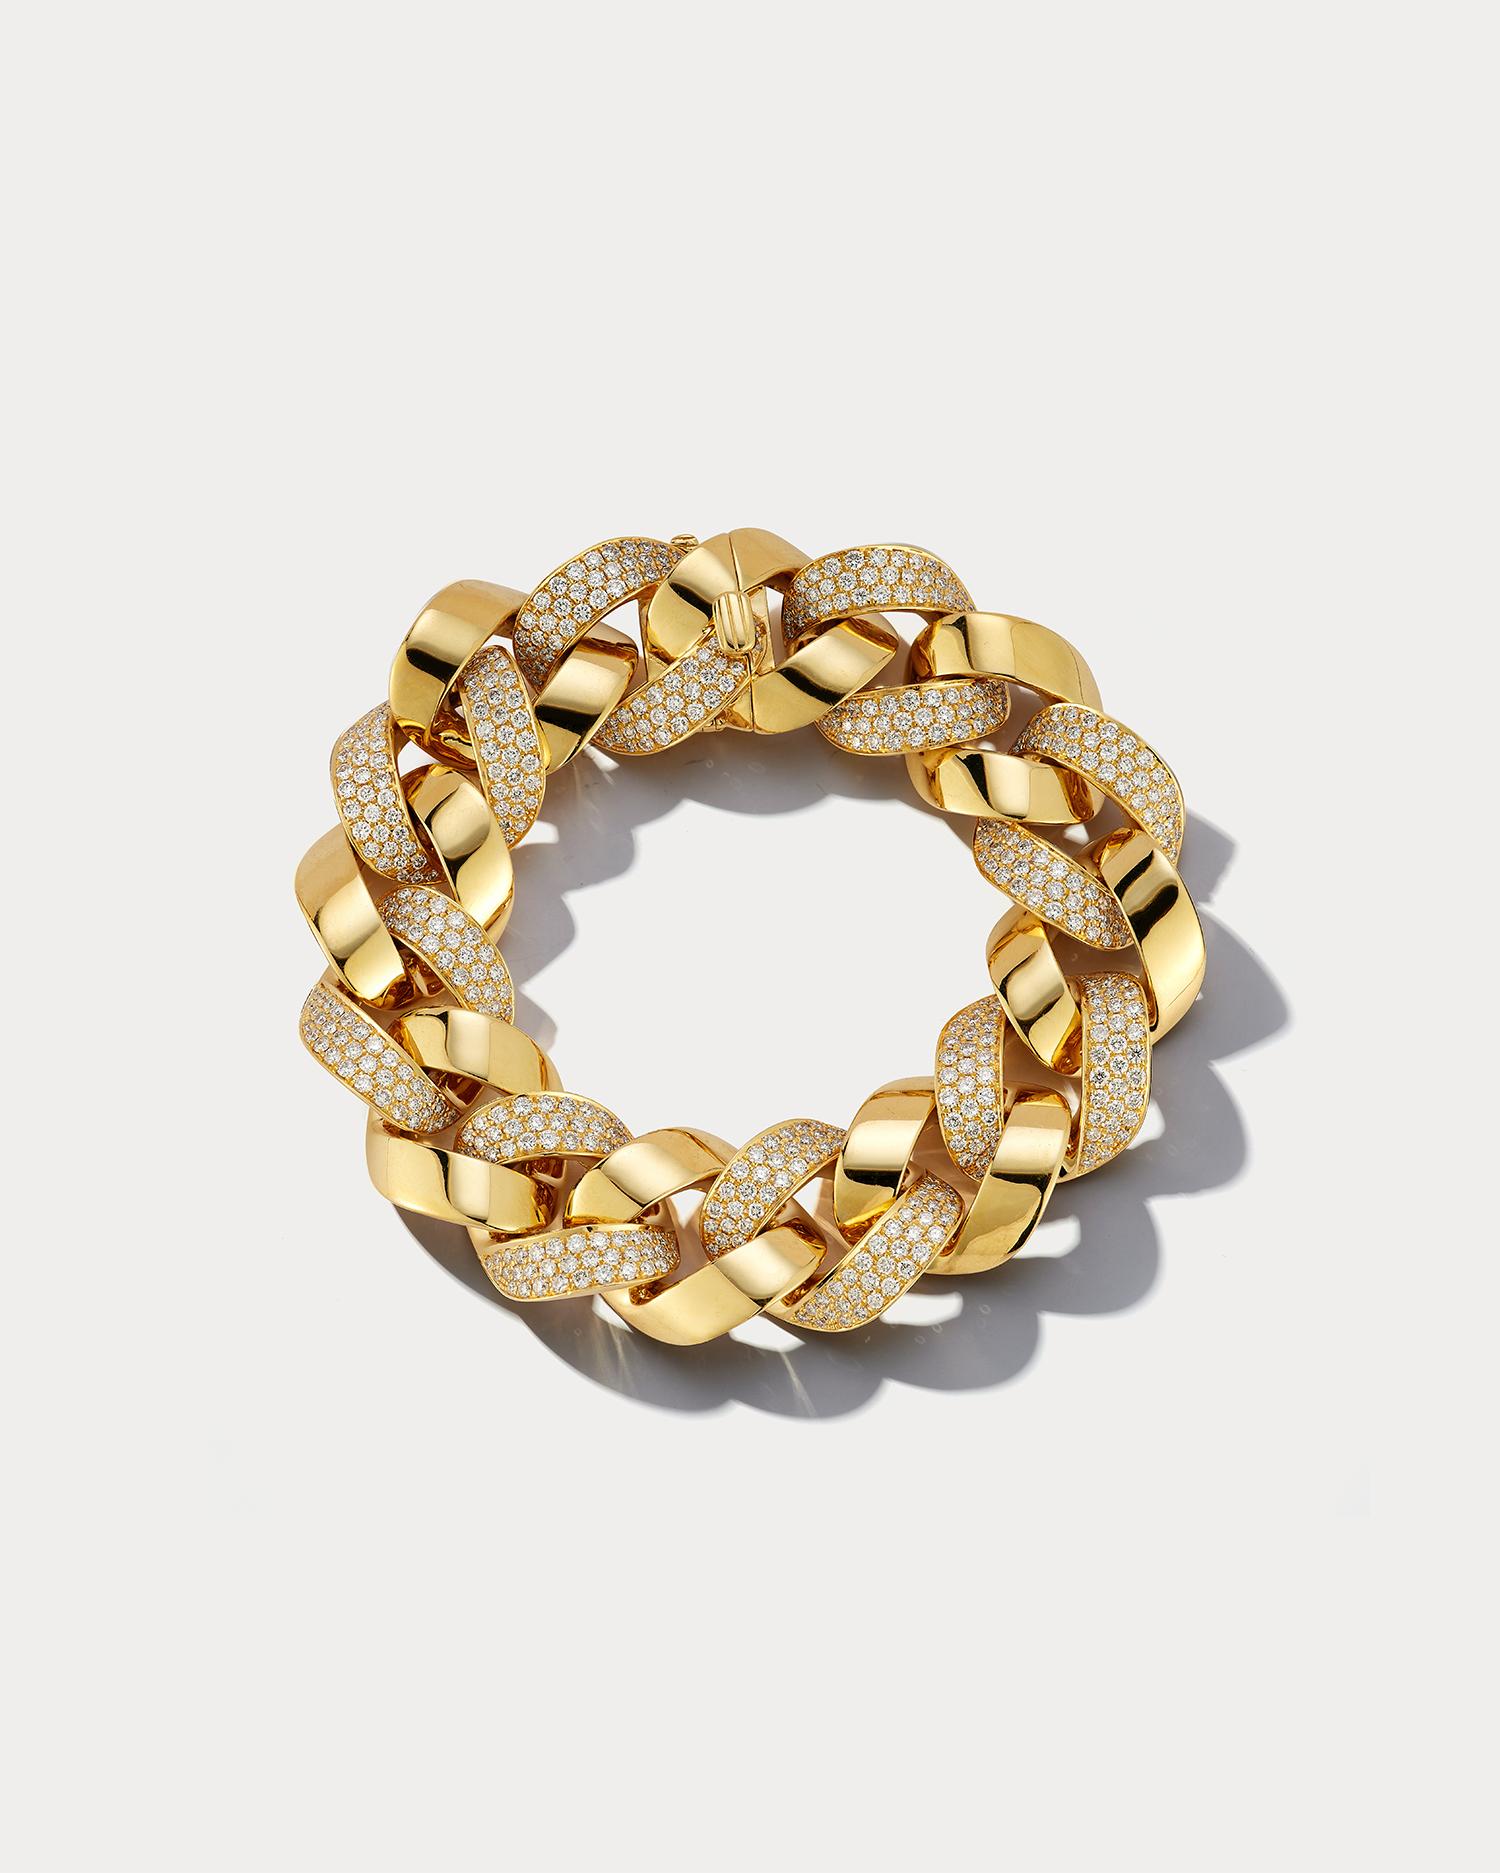 This exquisite Cuban link bracelet is a true statement piece that combines the luxury of yellow gold with the brilliance of diamonds. The bracelet is crafted from high-quality 18k yellow gold, which has a bright and lustrous appearance that